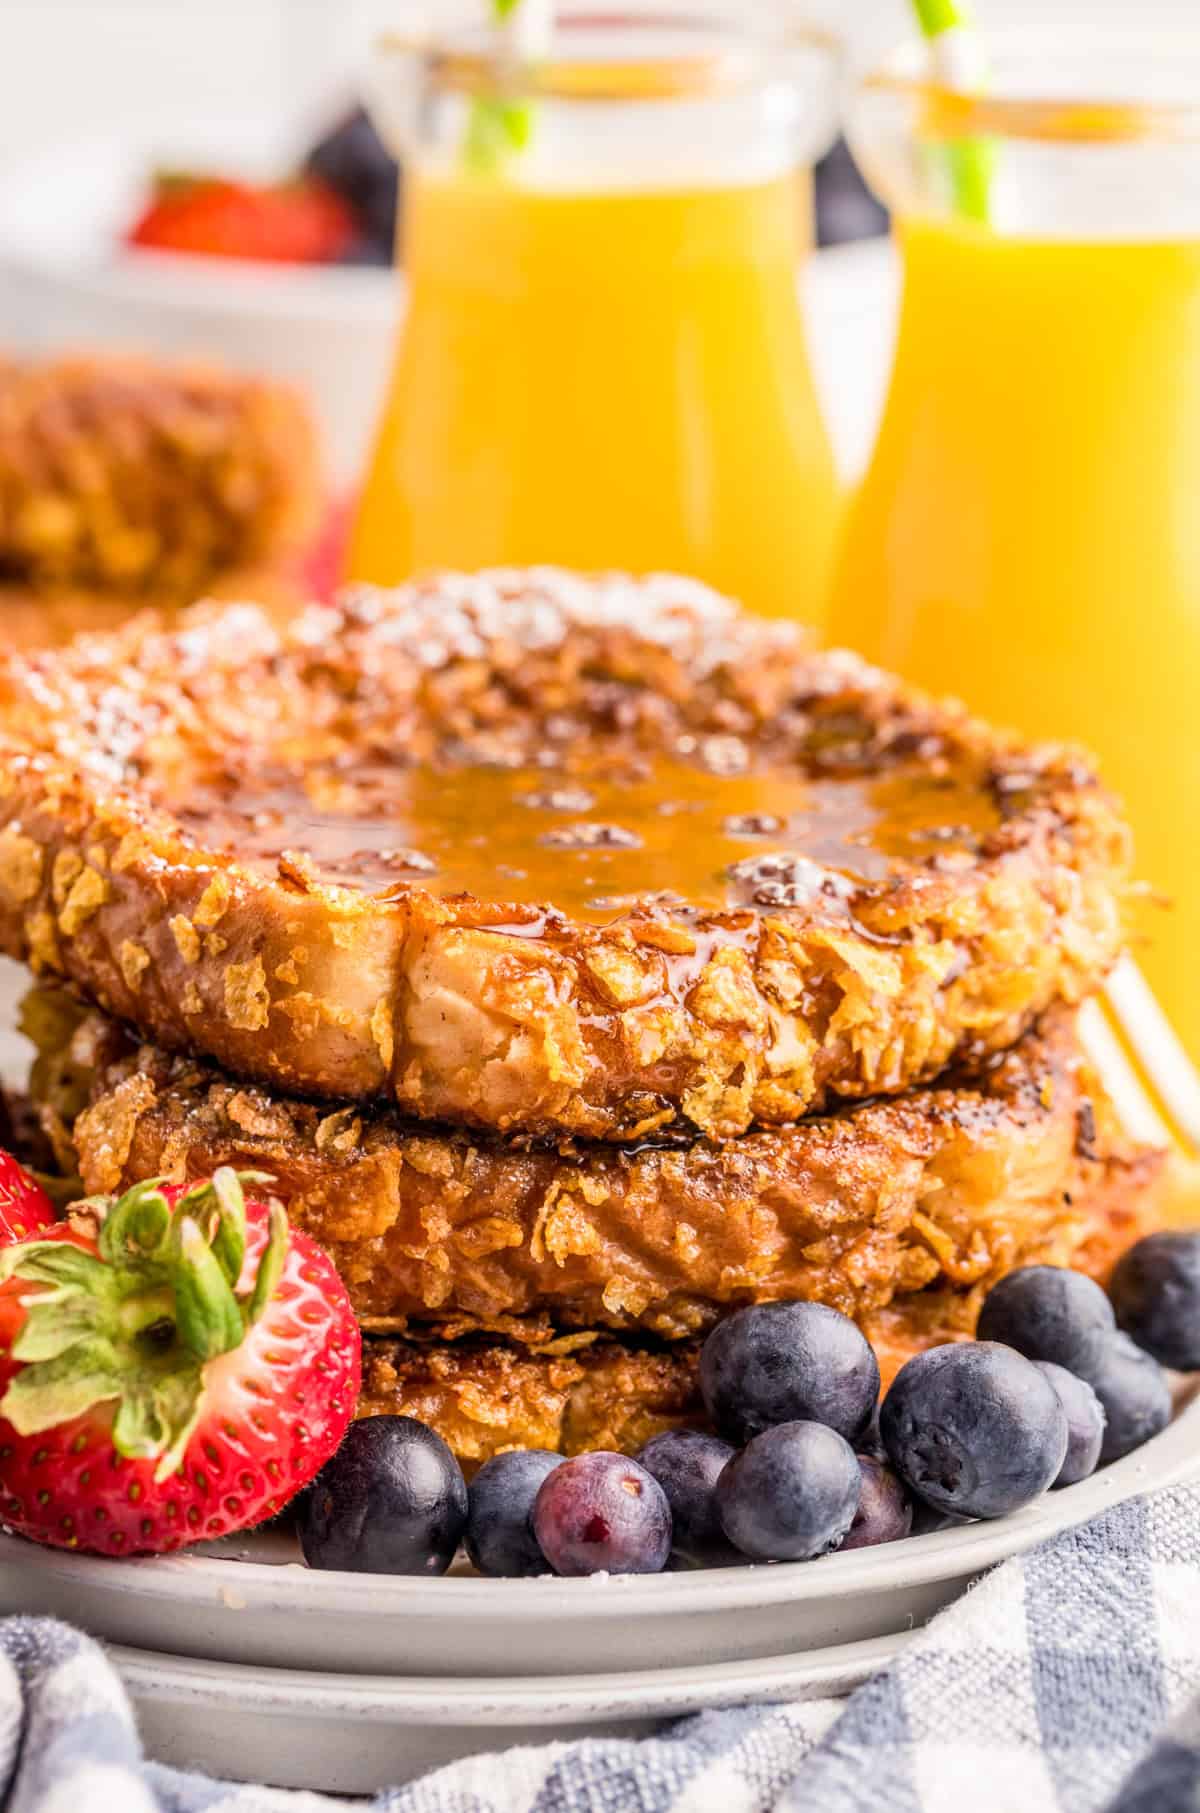 Stacked Crunchy French Toast on white plate with syrup and fruit and orange juice in background.